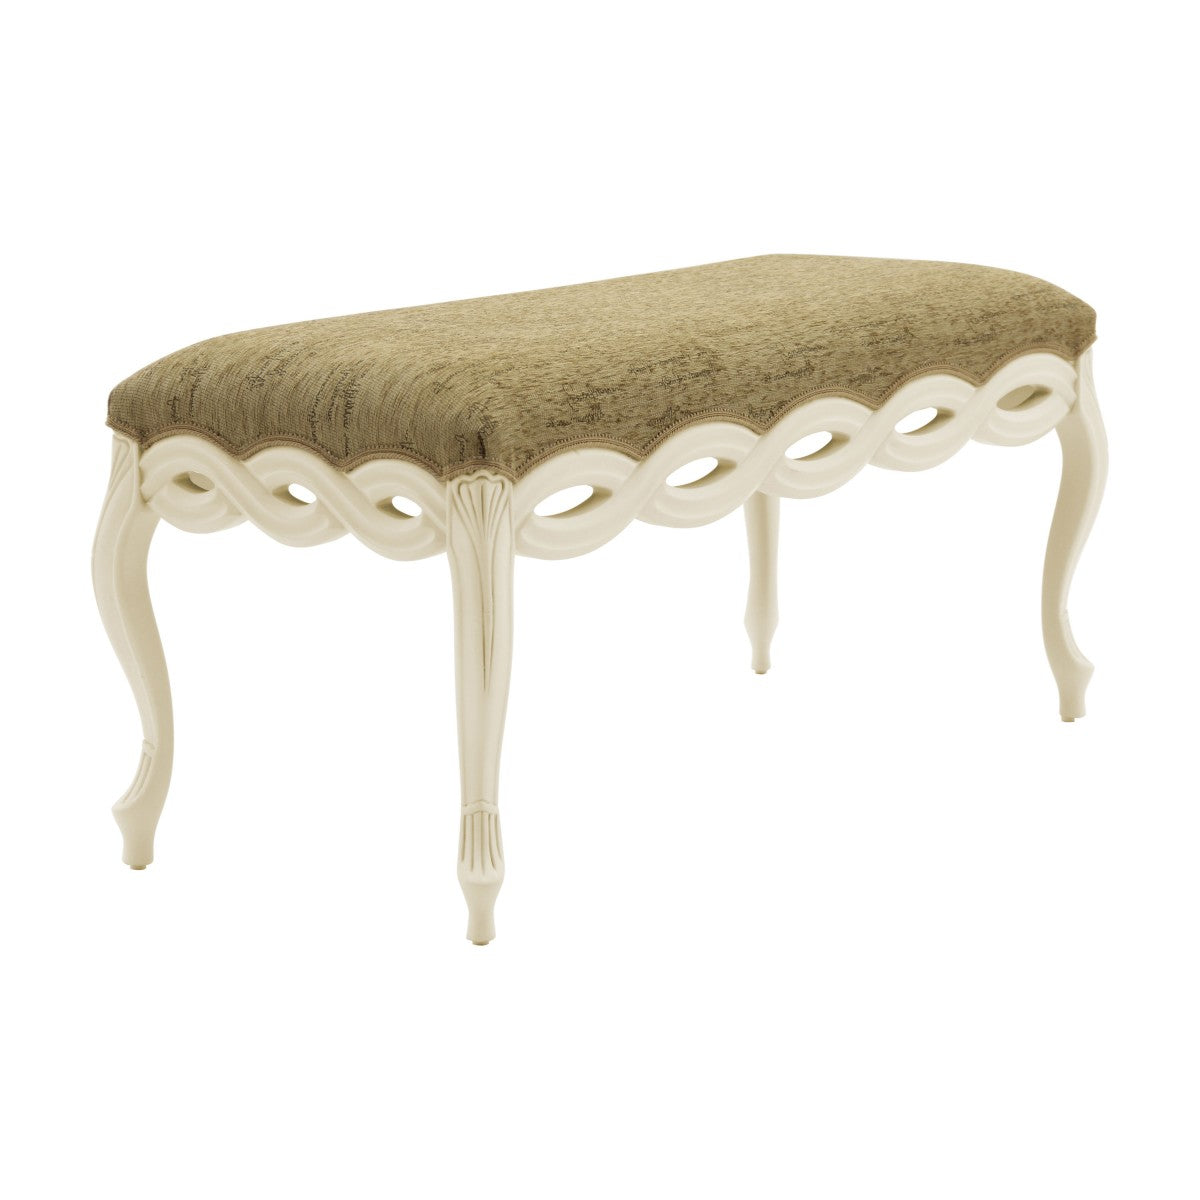 Intreccio Bespoke Upholstered Luxury Carved Statement Bench MS310Q Custom Made To Order